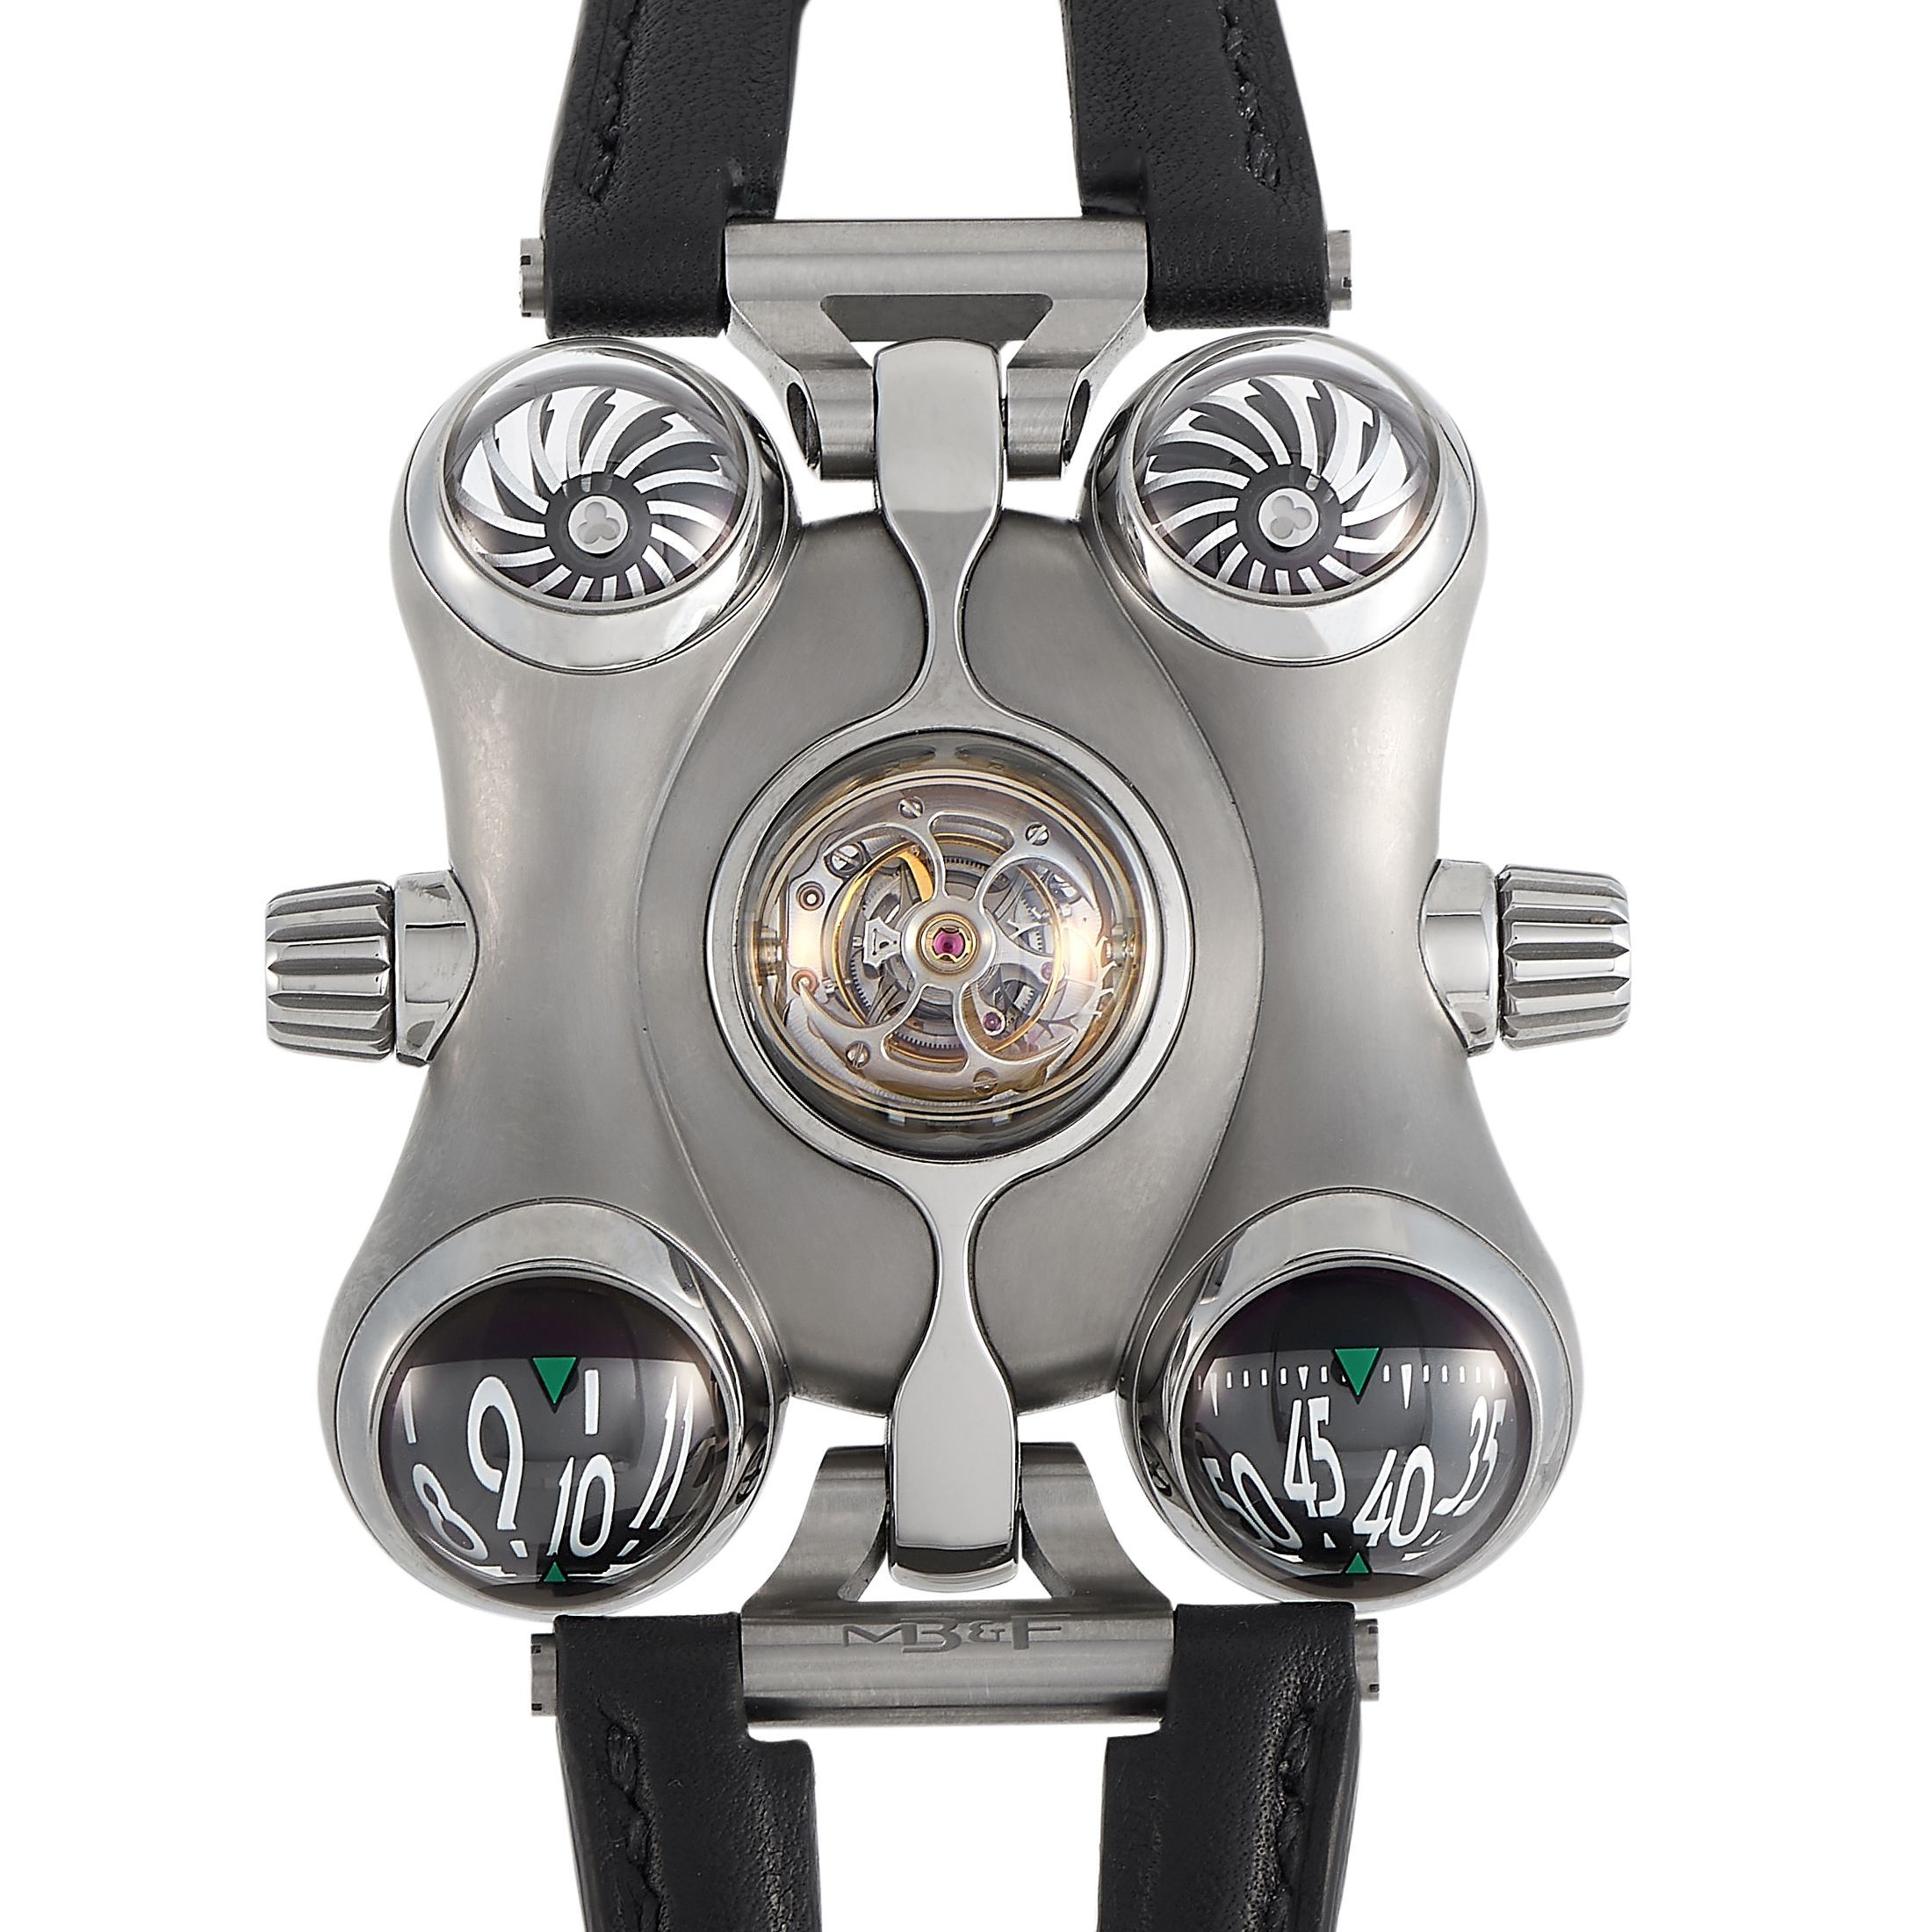 MB&F's New Lamborghini-Inspired Watch Is Beautiful, And 'Relatively'  Affordable (But Still $63K) | TechCrunch